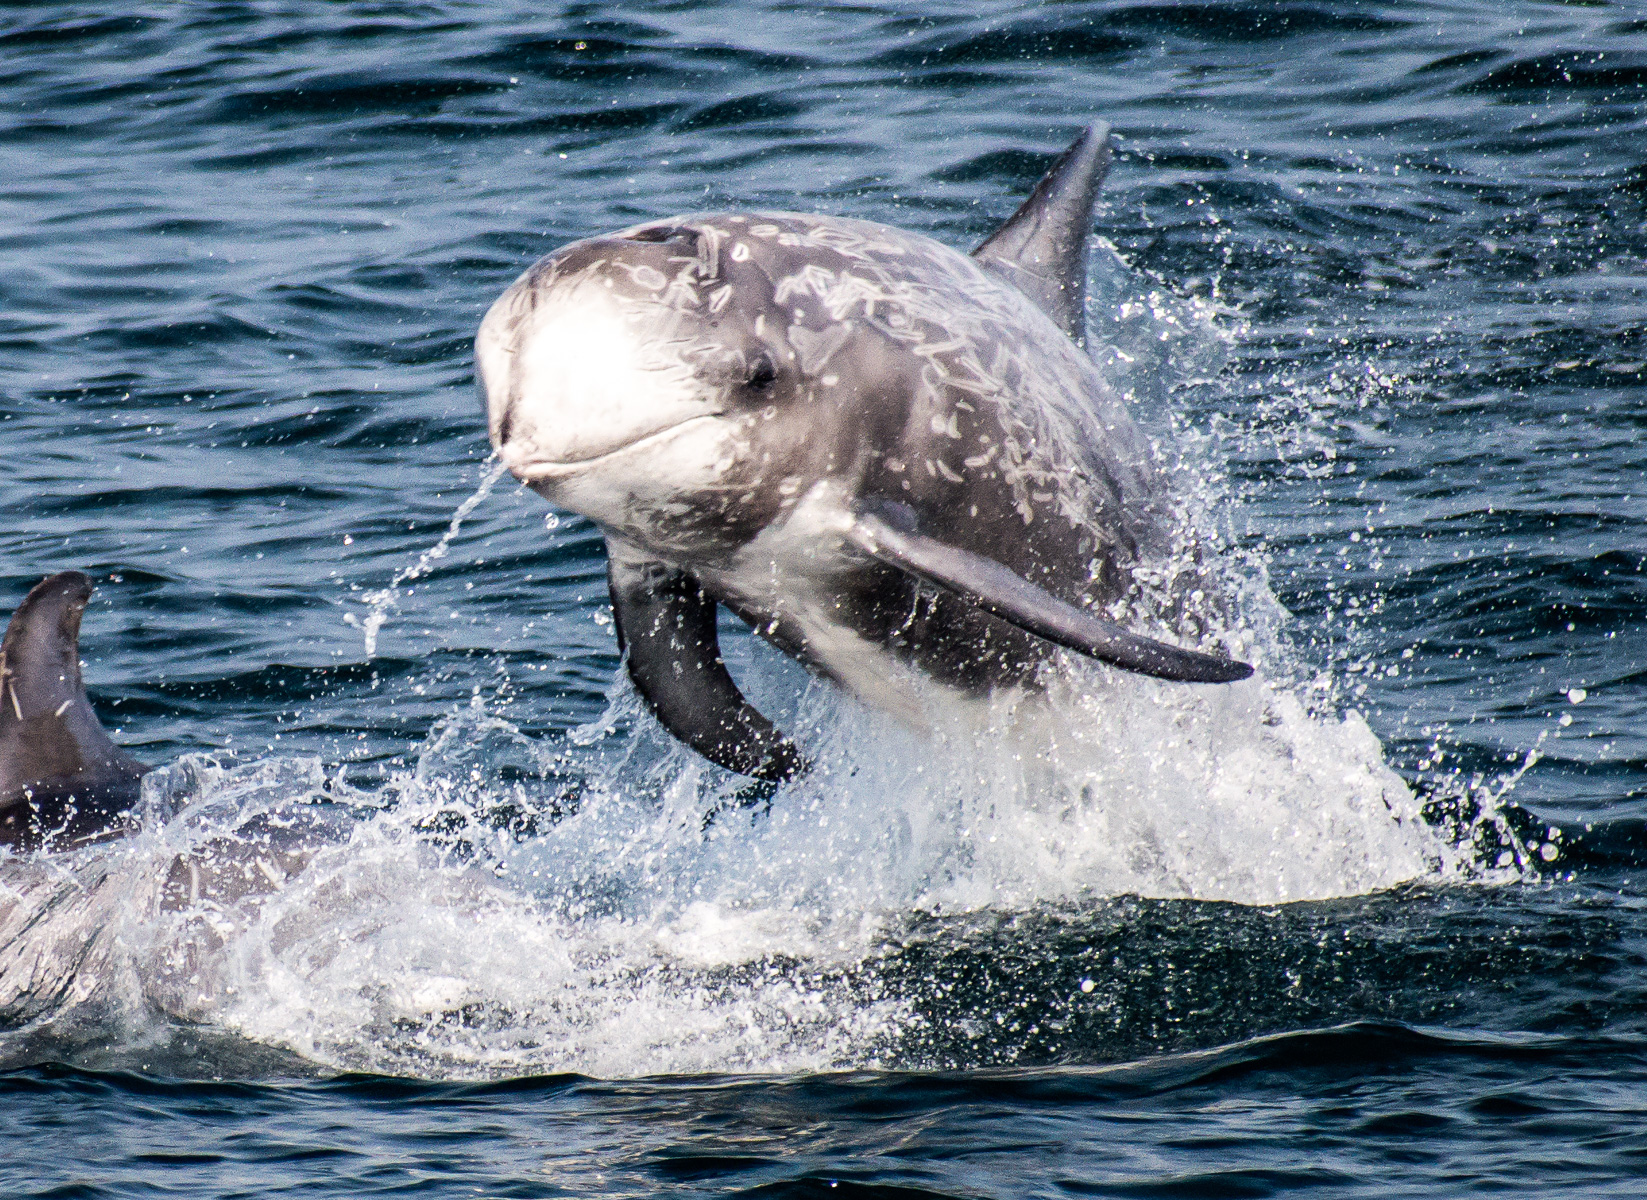 A Risso's dolphin (Grampus griseus) leaps from the waters of the Monterey Bay